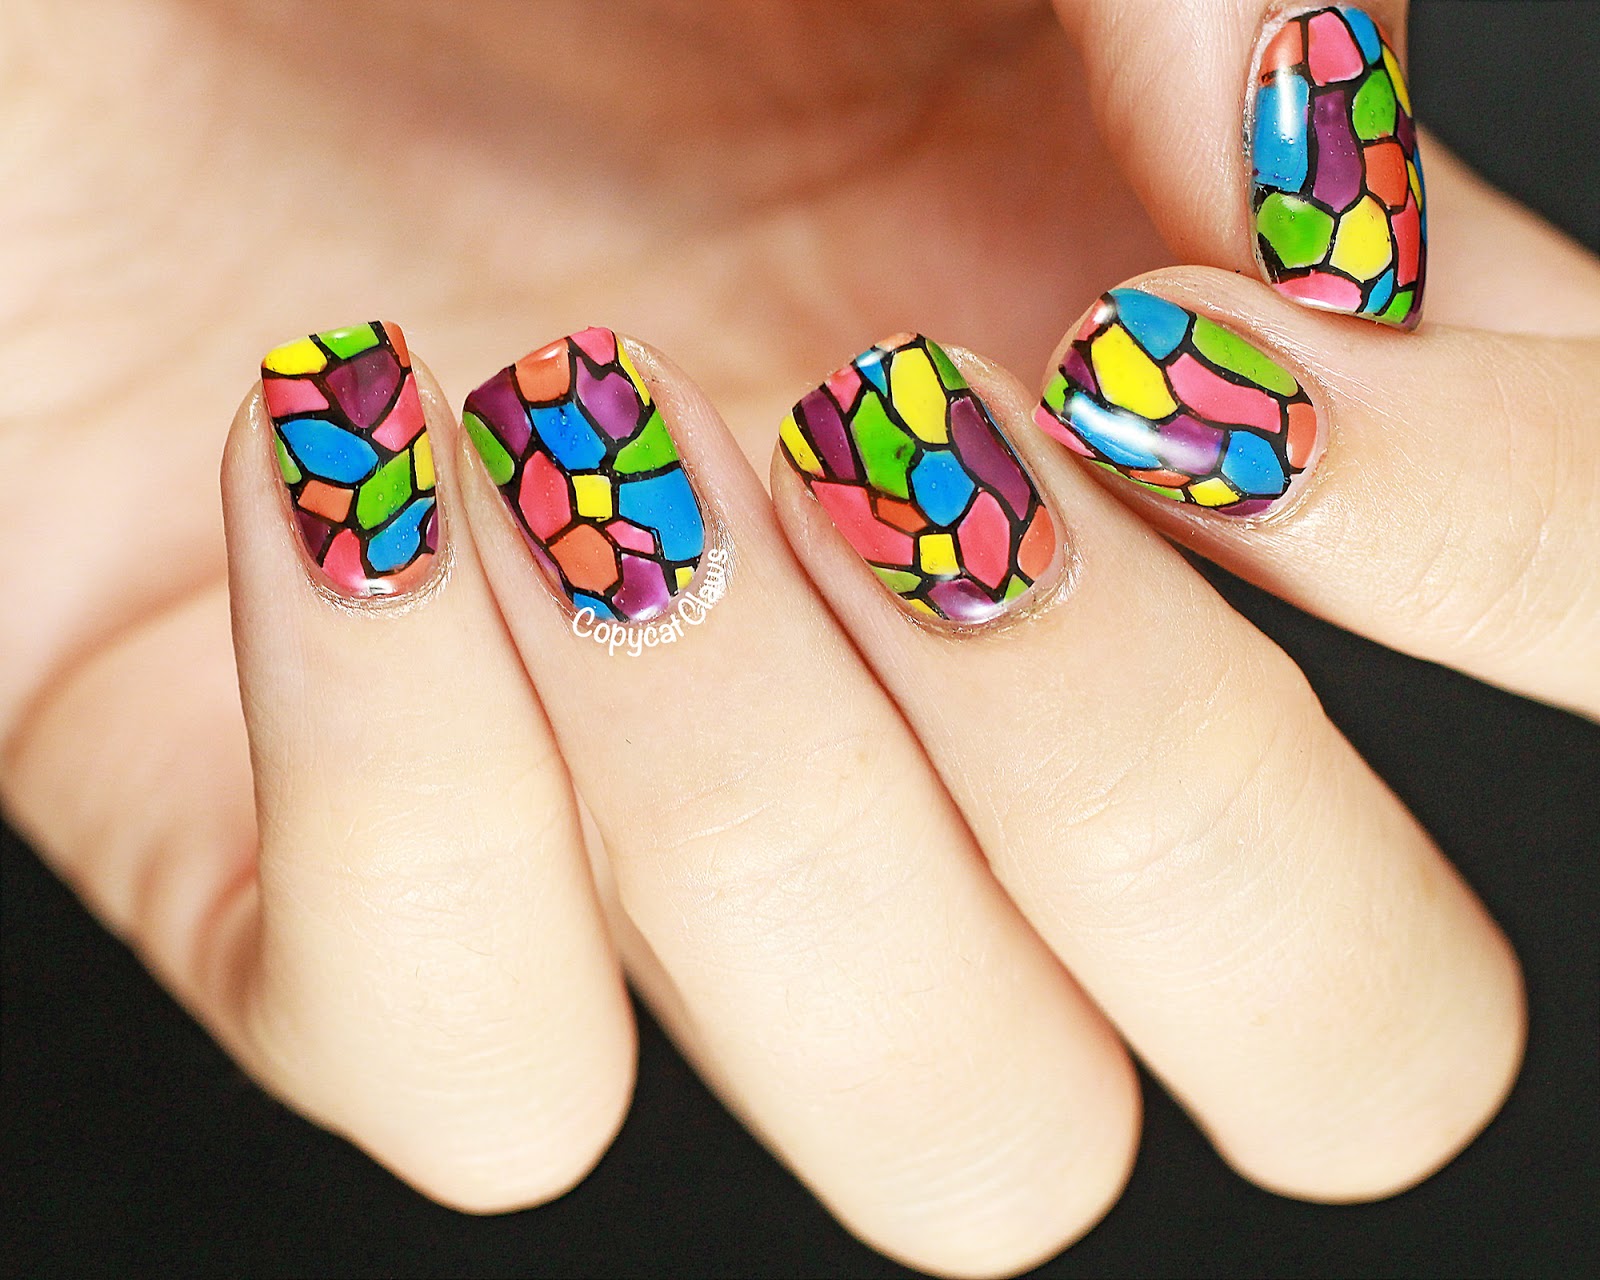 1. Glass Nail Art Designs: 20+ Ideas for a Dazzling Manicure - wide 3